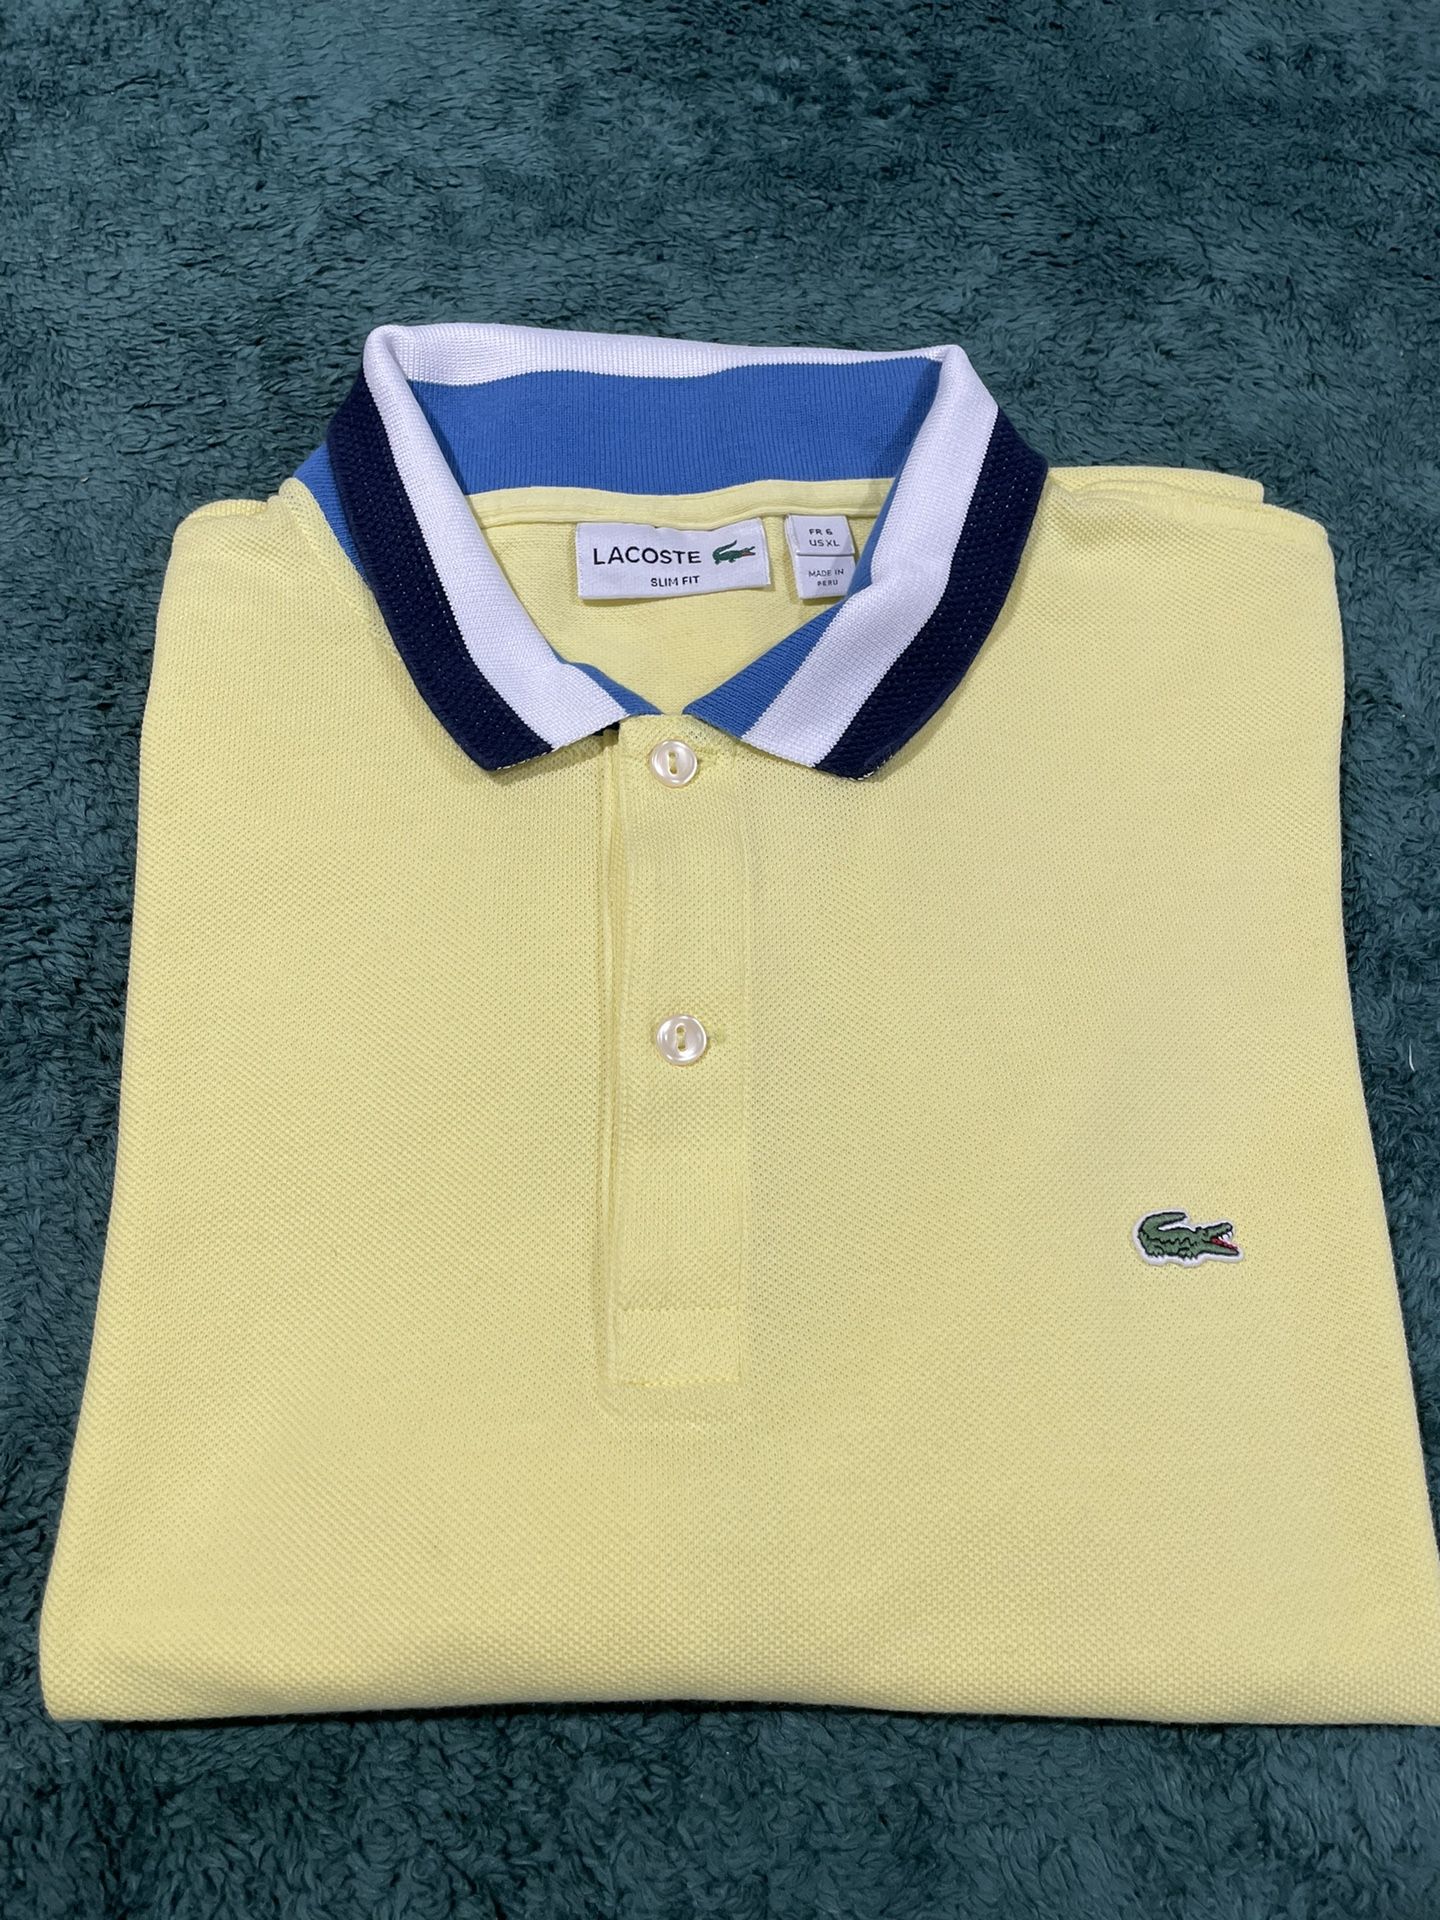 Lacoste Slim Fit XL Shirt : Gently Used. Shirt In Excellent Condition 